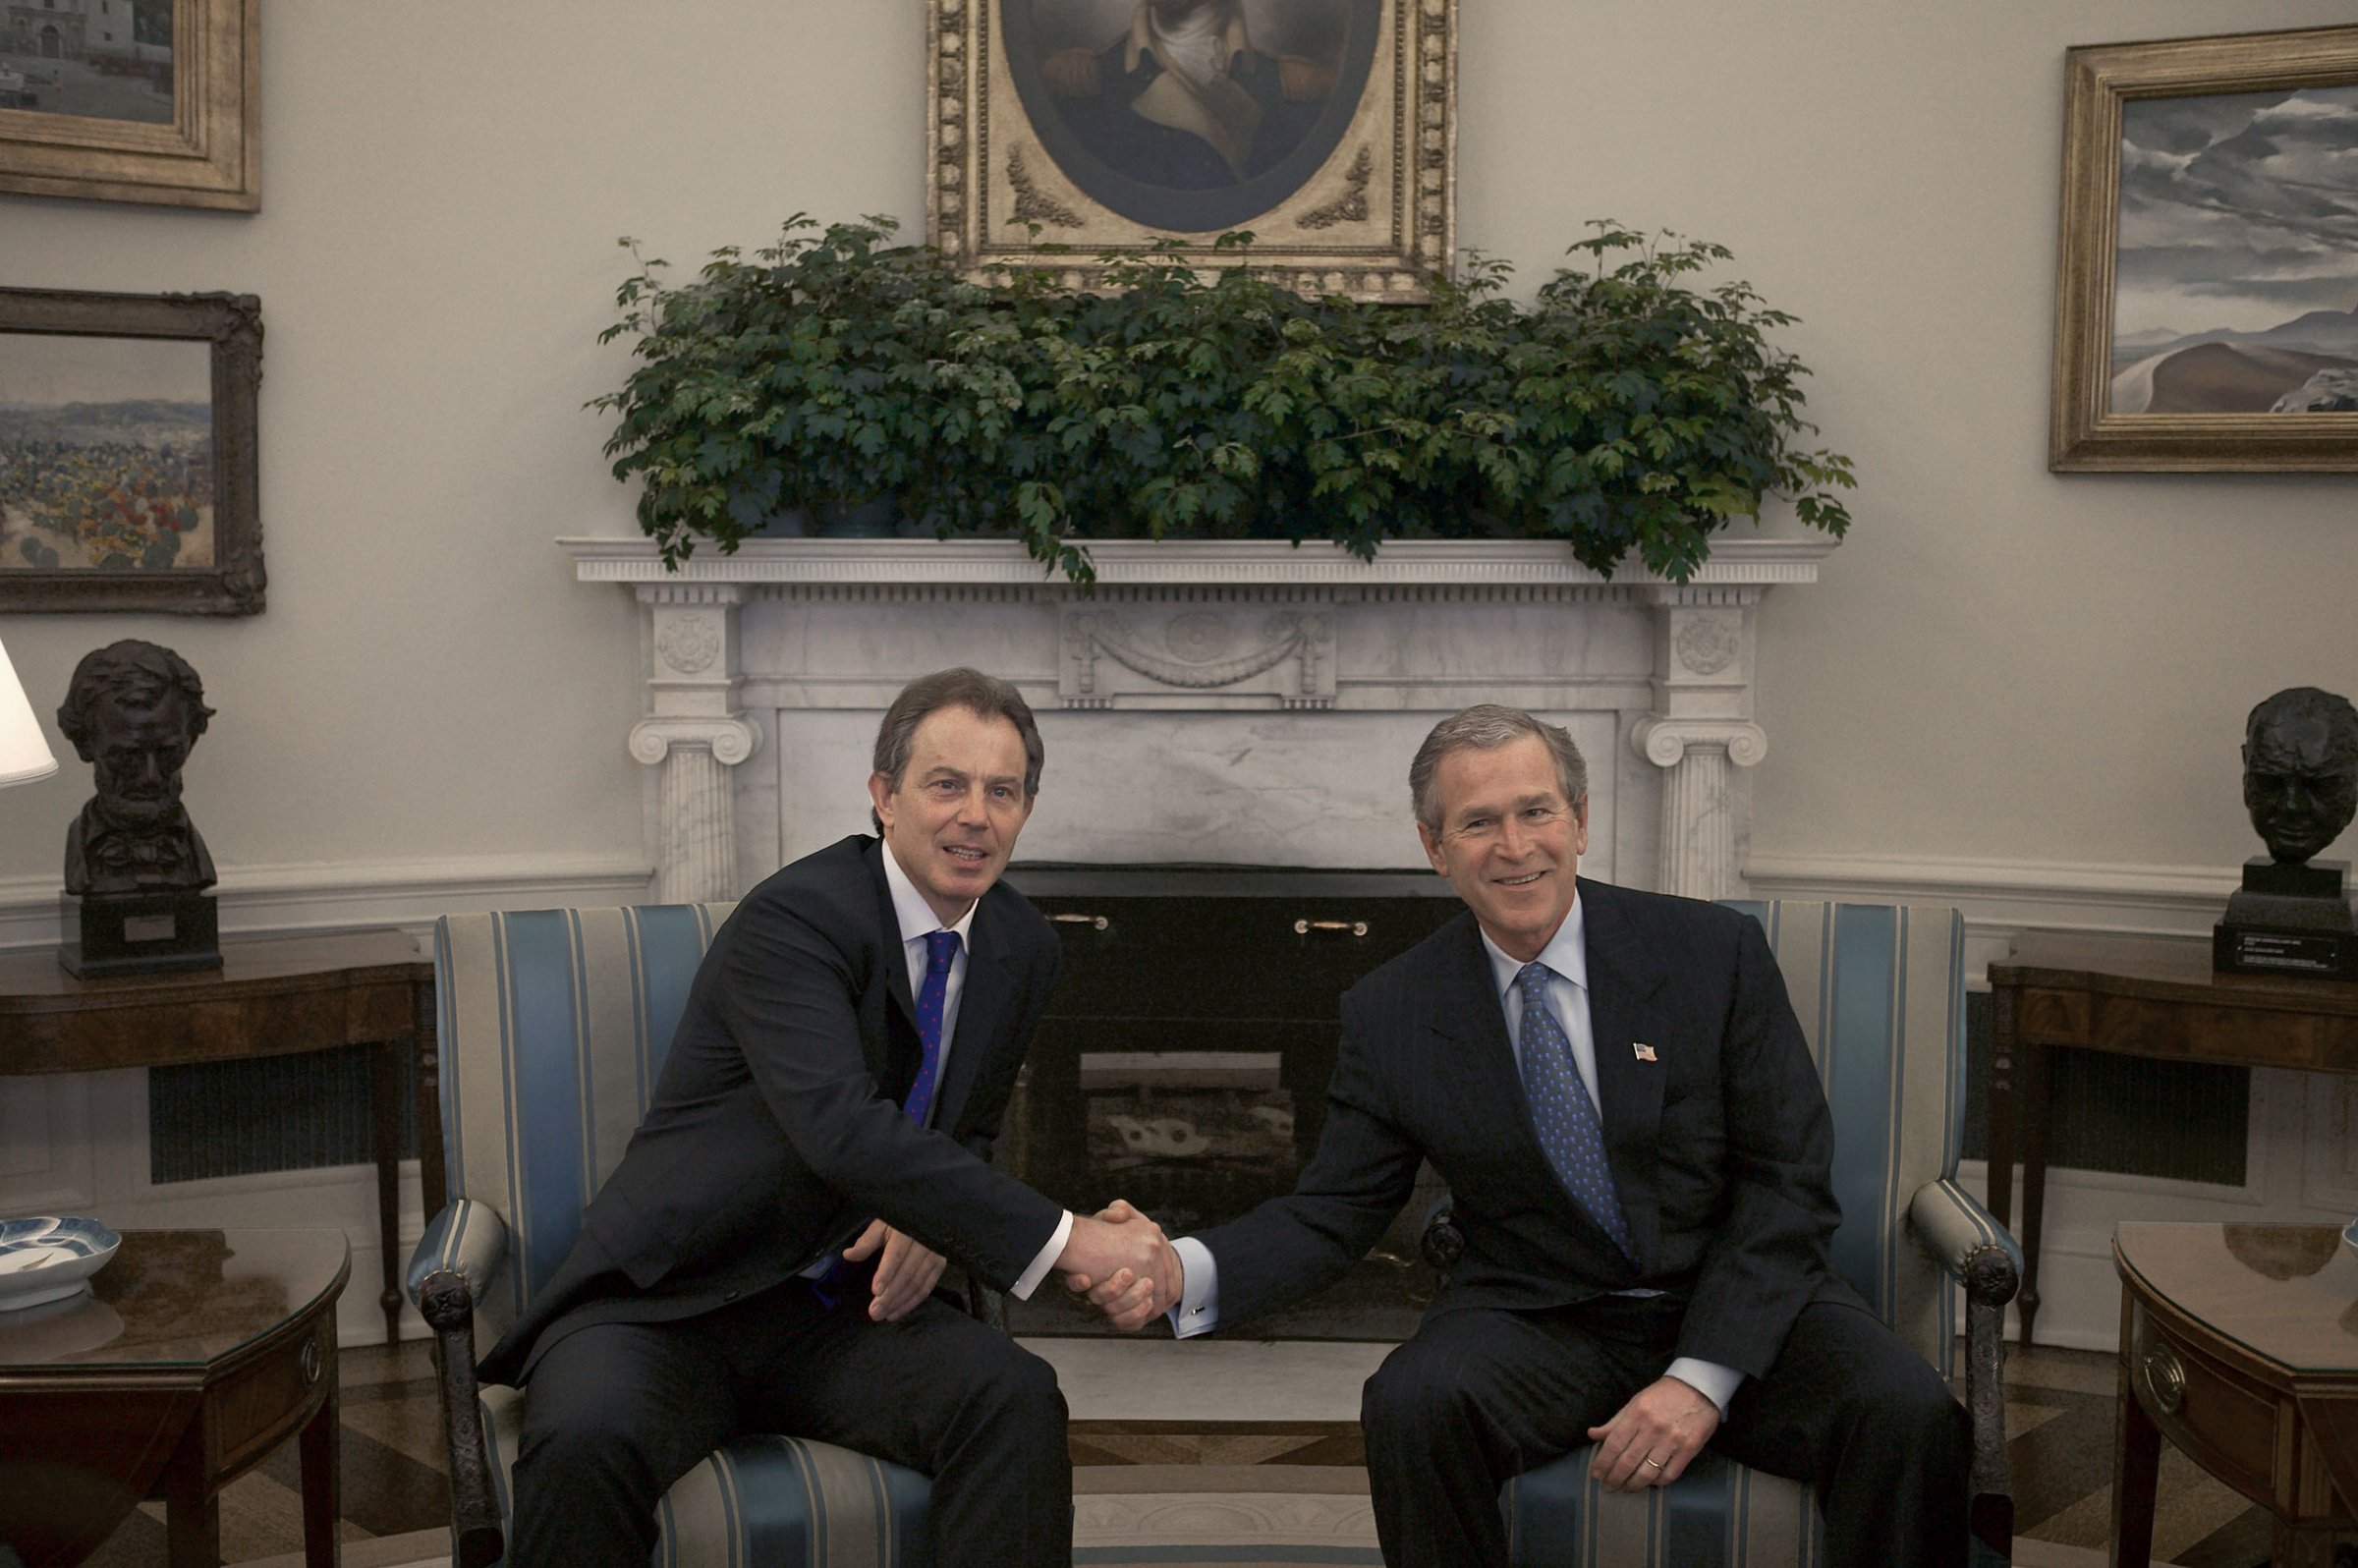 Did Blair secretly agree to back Bush on going to war in Iraq? A new report may reveal the answer